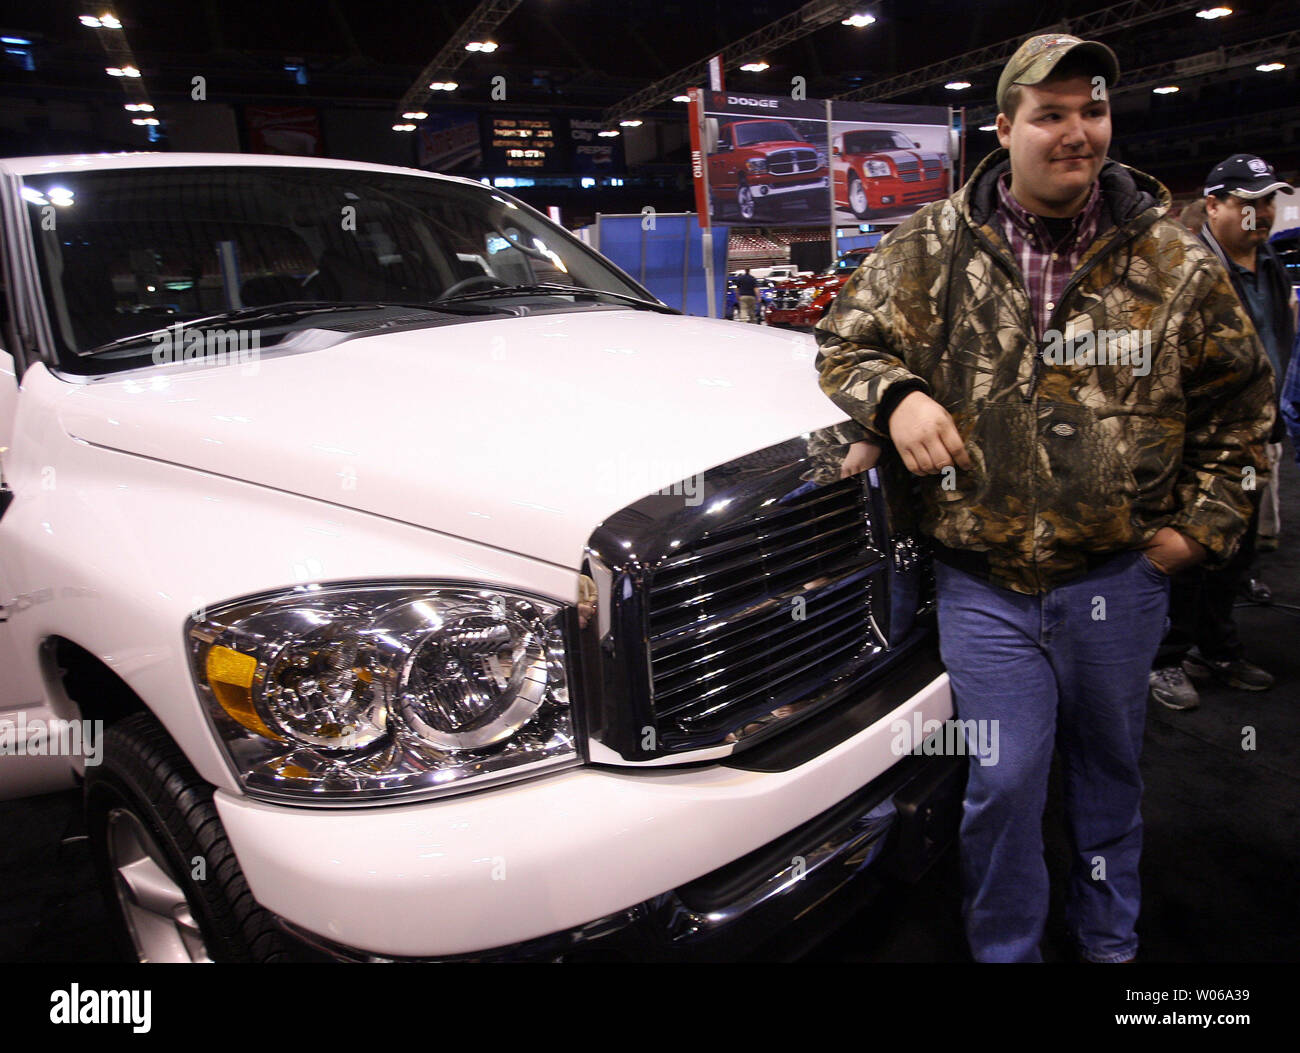 Mitchell Hults, the 15-year-old who identified the get-a-way vehicle used by kidnapper Michael Devlin to kidnap Ben Ownby on January 8, 2007, leans on the hood of a new truck given to him as a reward by Chrysler at the St. Louis Auto Show in St. Louis on January 24, 2007. Although only 15, Hults will turn 16 in six months and plans to use the $36 thousand vehicle to haul his ATV. (UPI Photo/Bill Greenblatt) Stock Photo